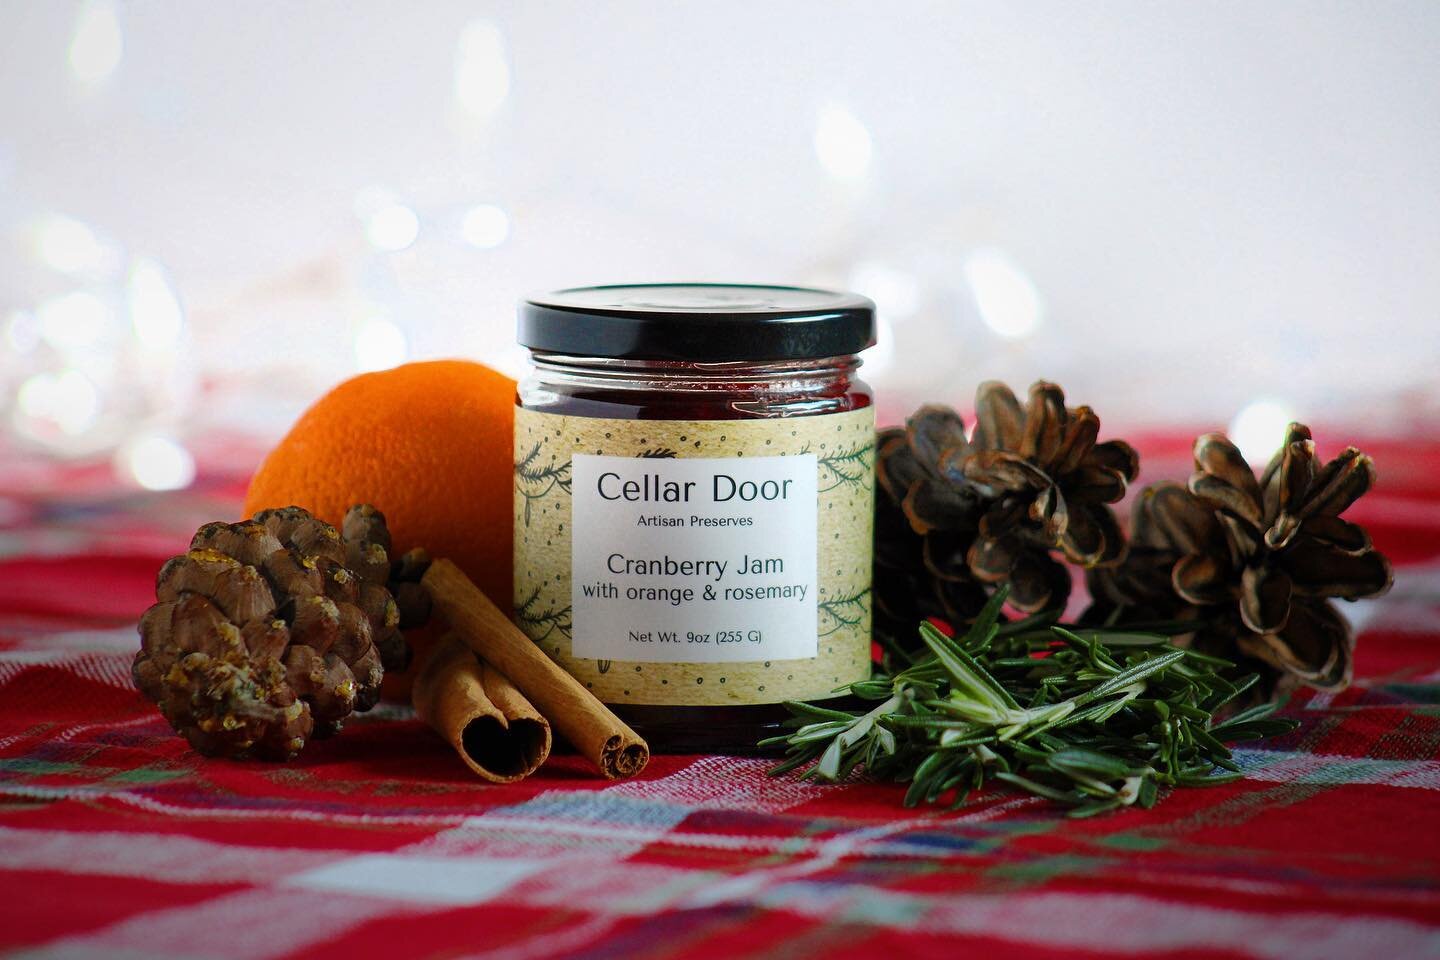 Halloween is behind us and we&rsquo;re onto the next thing! It&rsquo;s the Holiday season here at Cellar Door Artisan Preserves 🎄🎅🏻🎄 

Now available on our website is our Holiday Seasonal Flavor - Cranberry Jam with Orange and Rosemary. 

We know